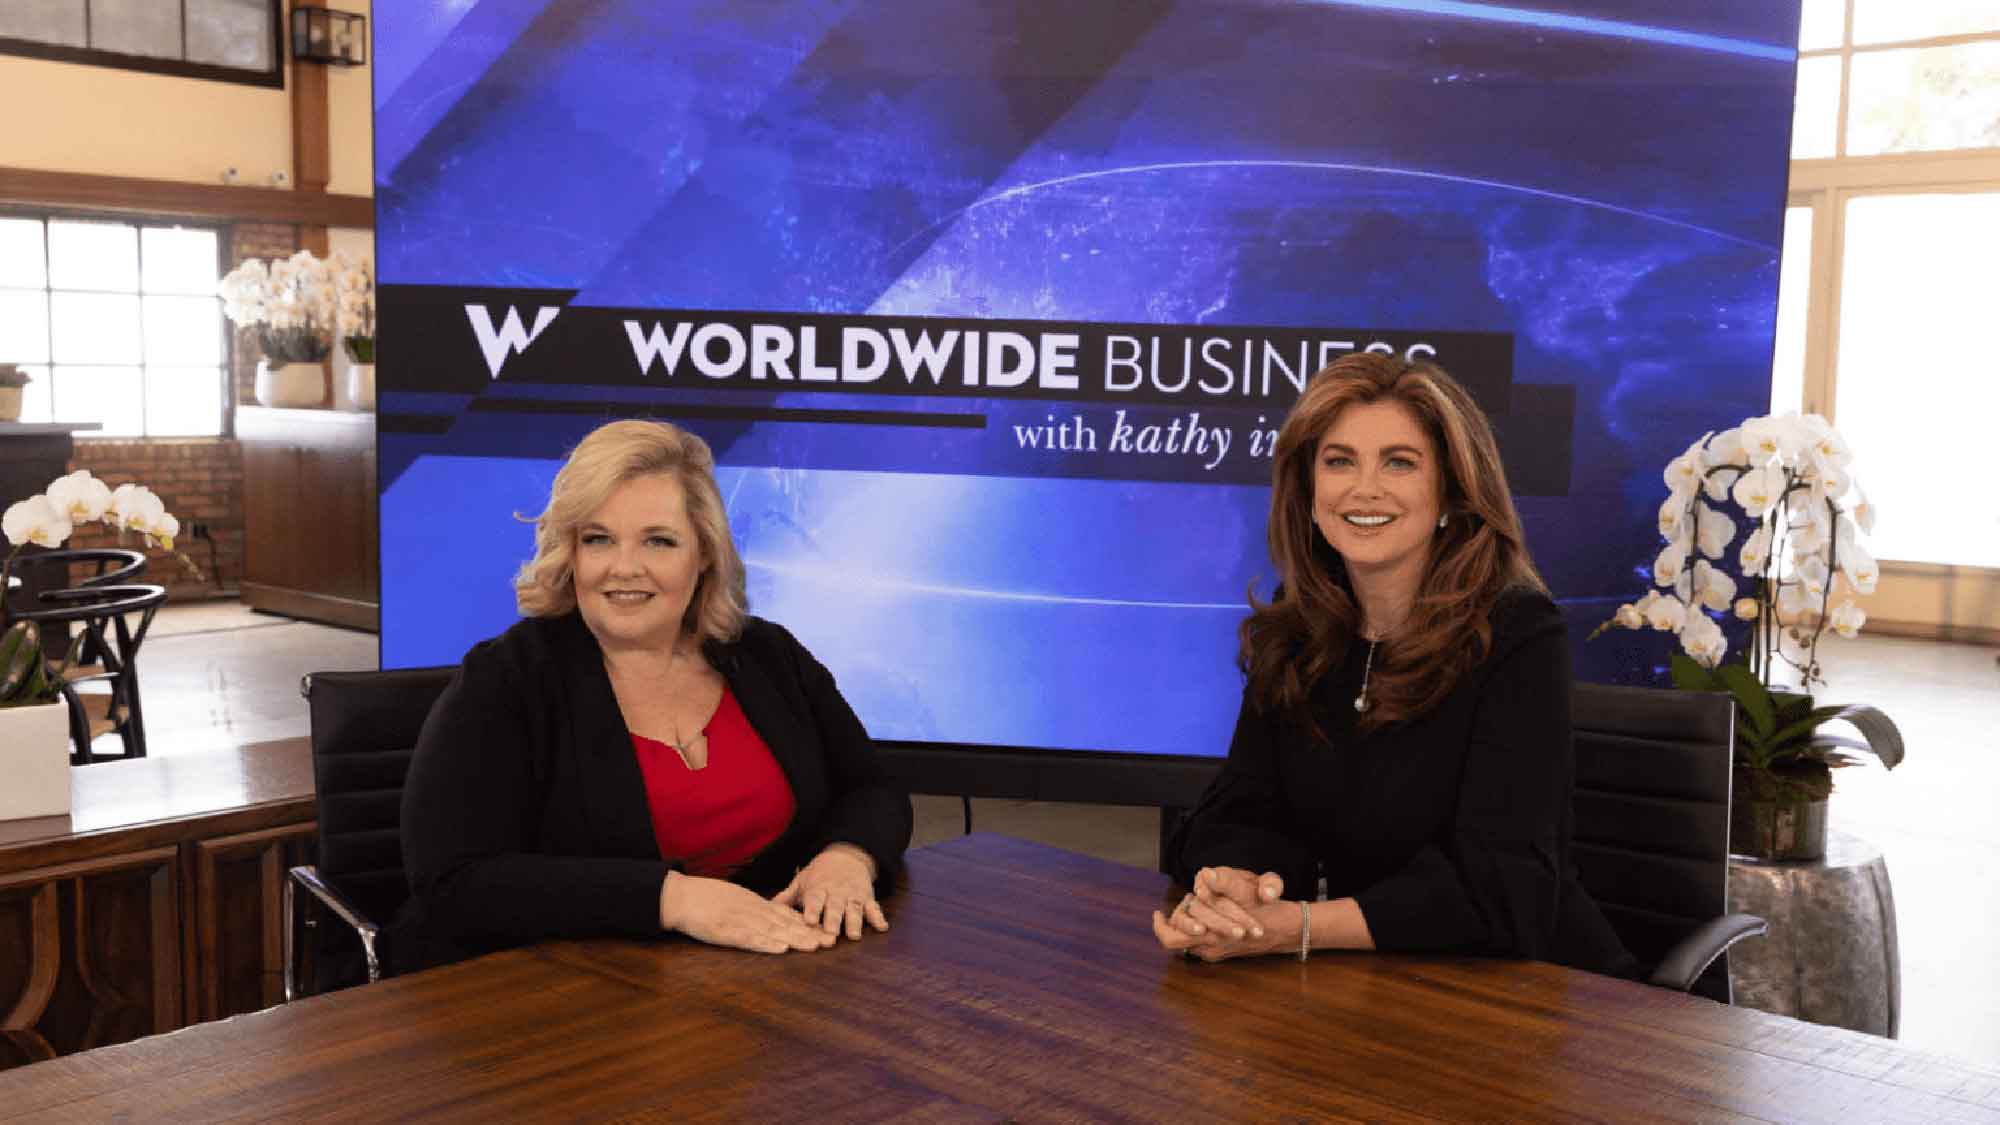 Gb Sciences’ Novel Parkinson’s Disease Medication is Featured on Worldwide Business with Kathy Ireland